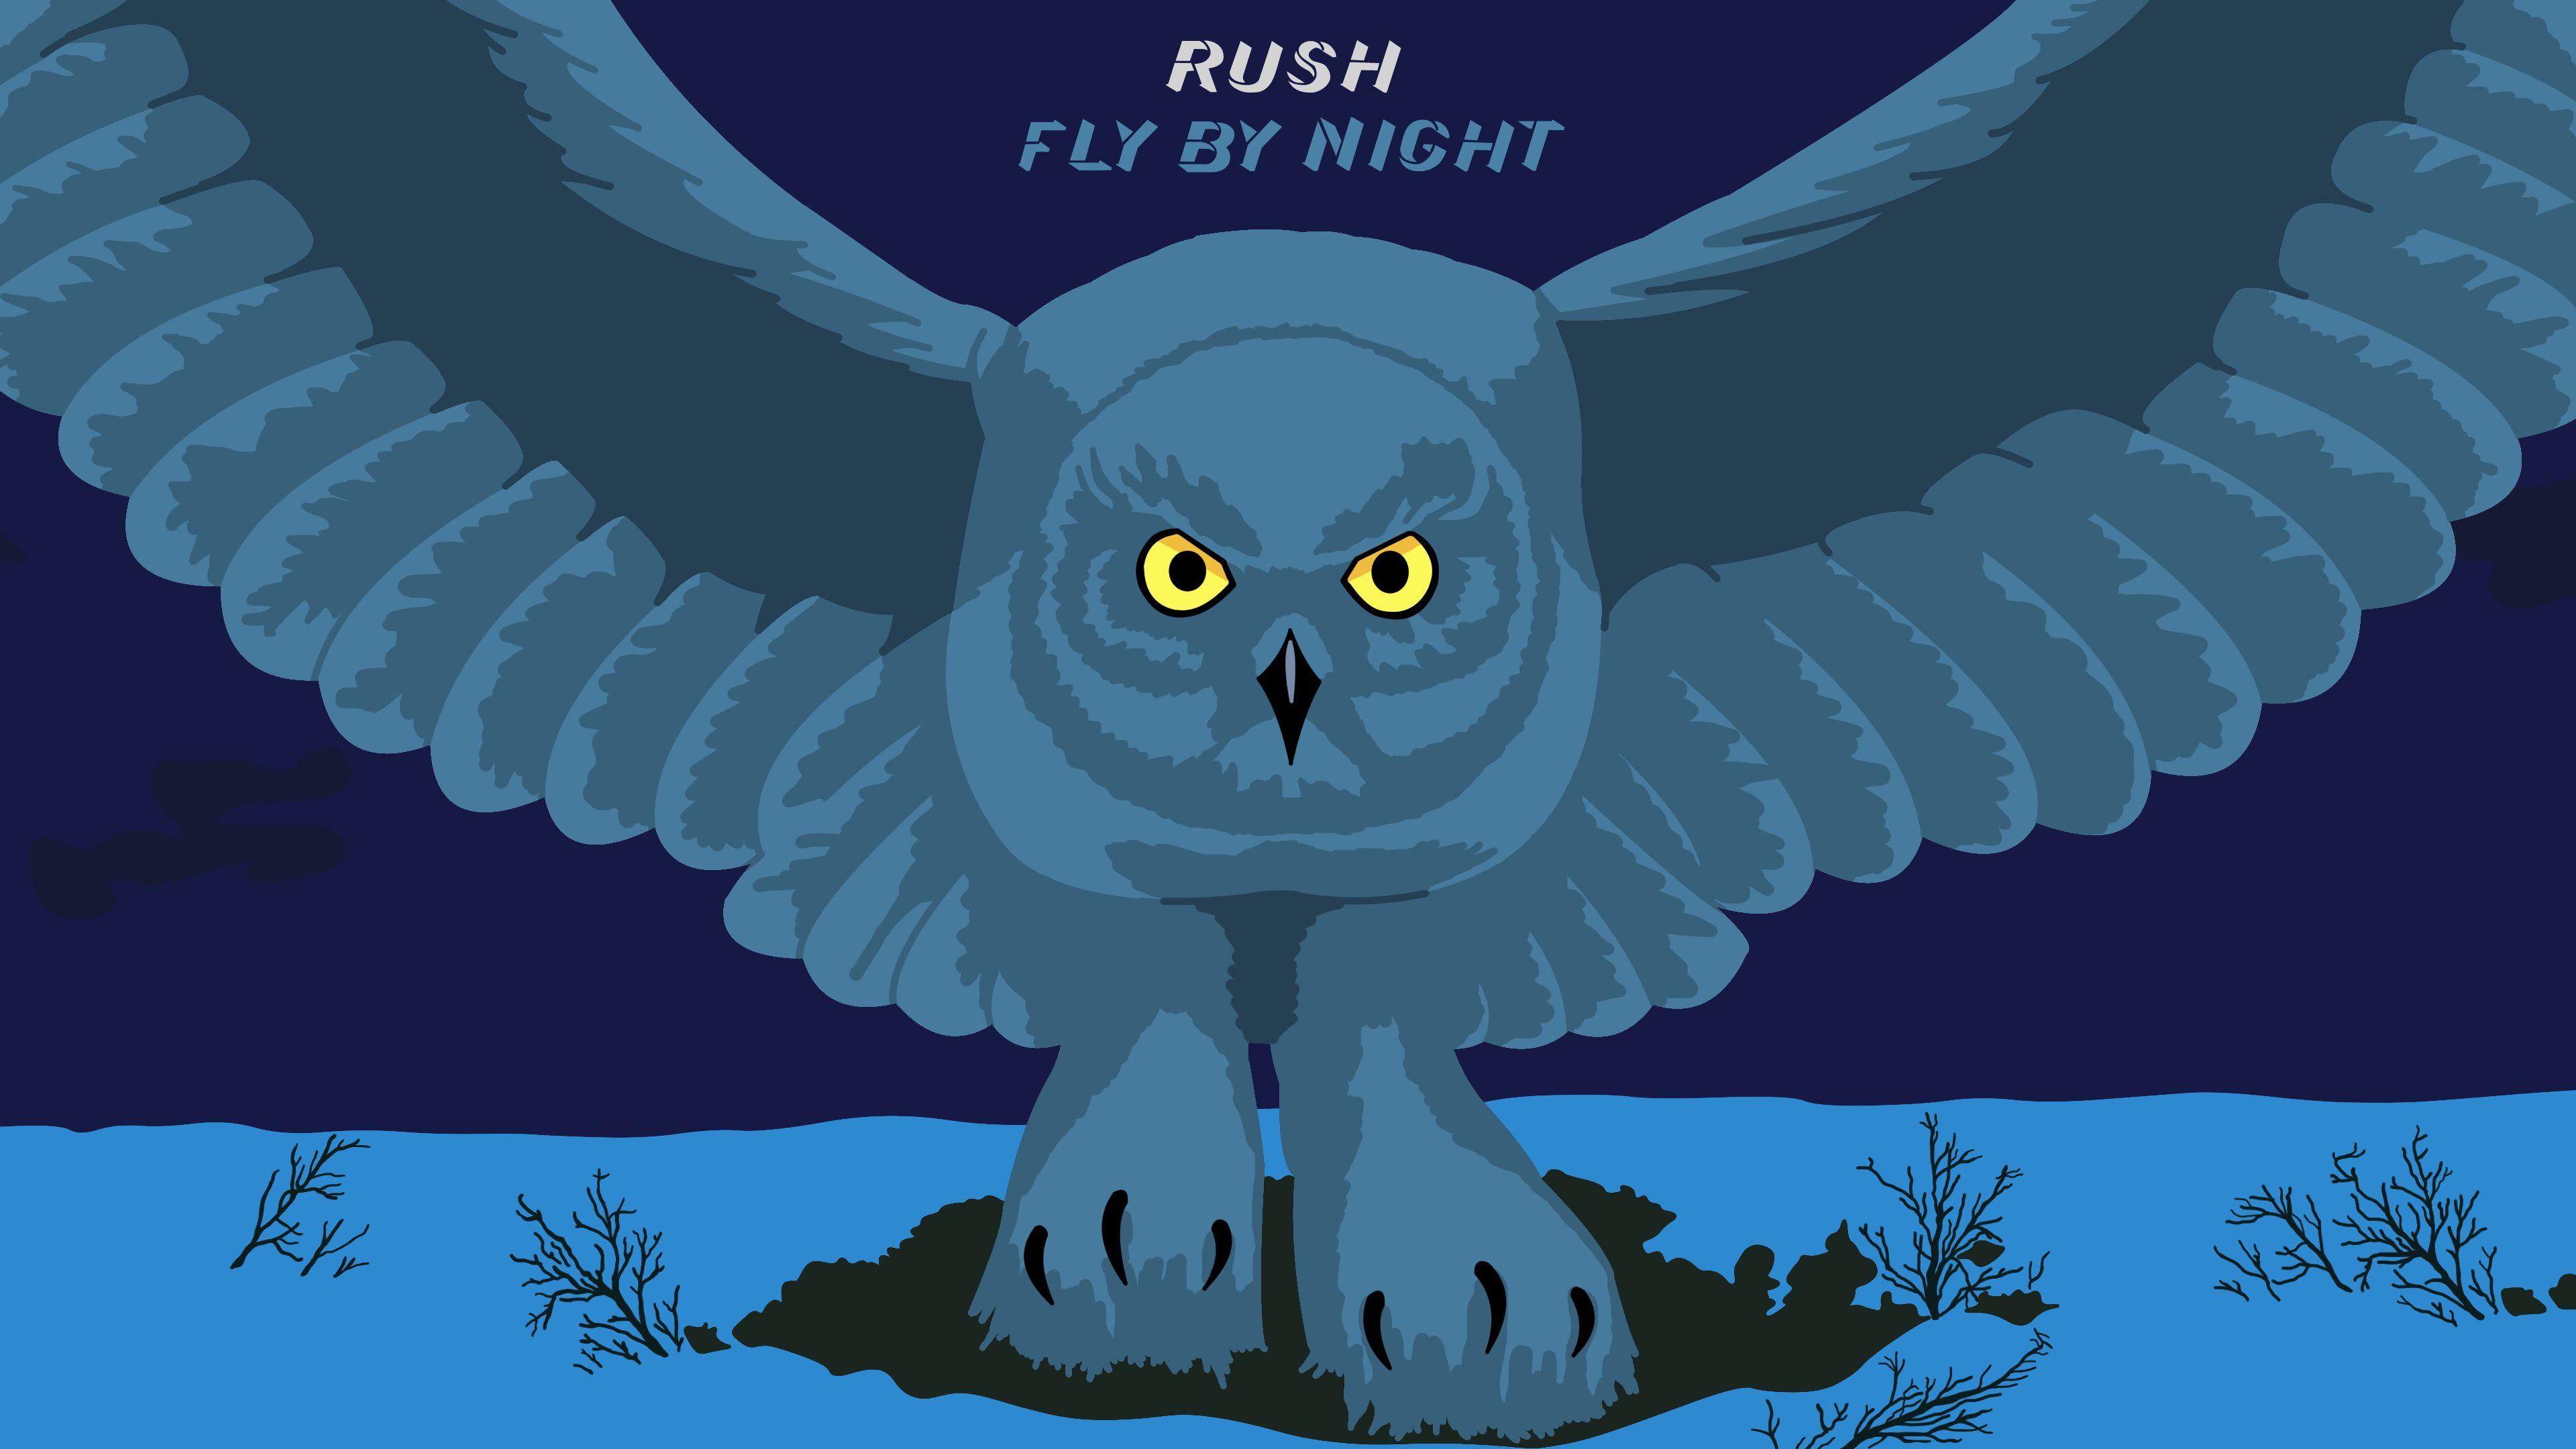 Fly by Night wallpaper, anyone? Made to go with the Windows 10 flat